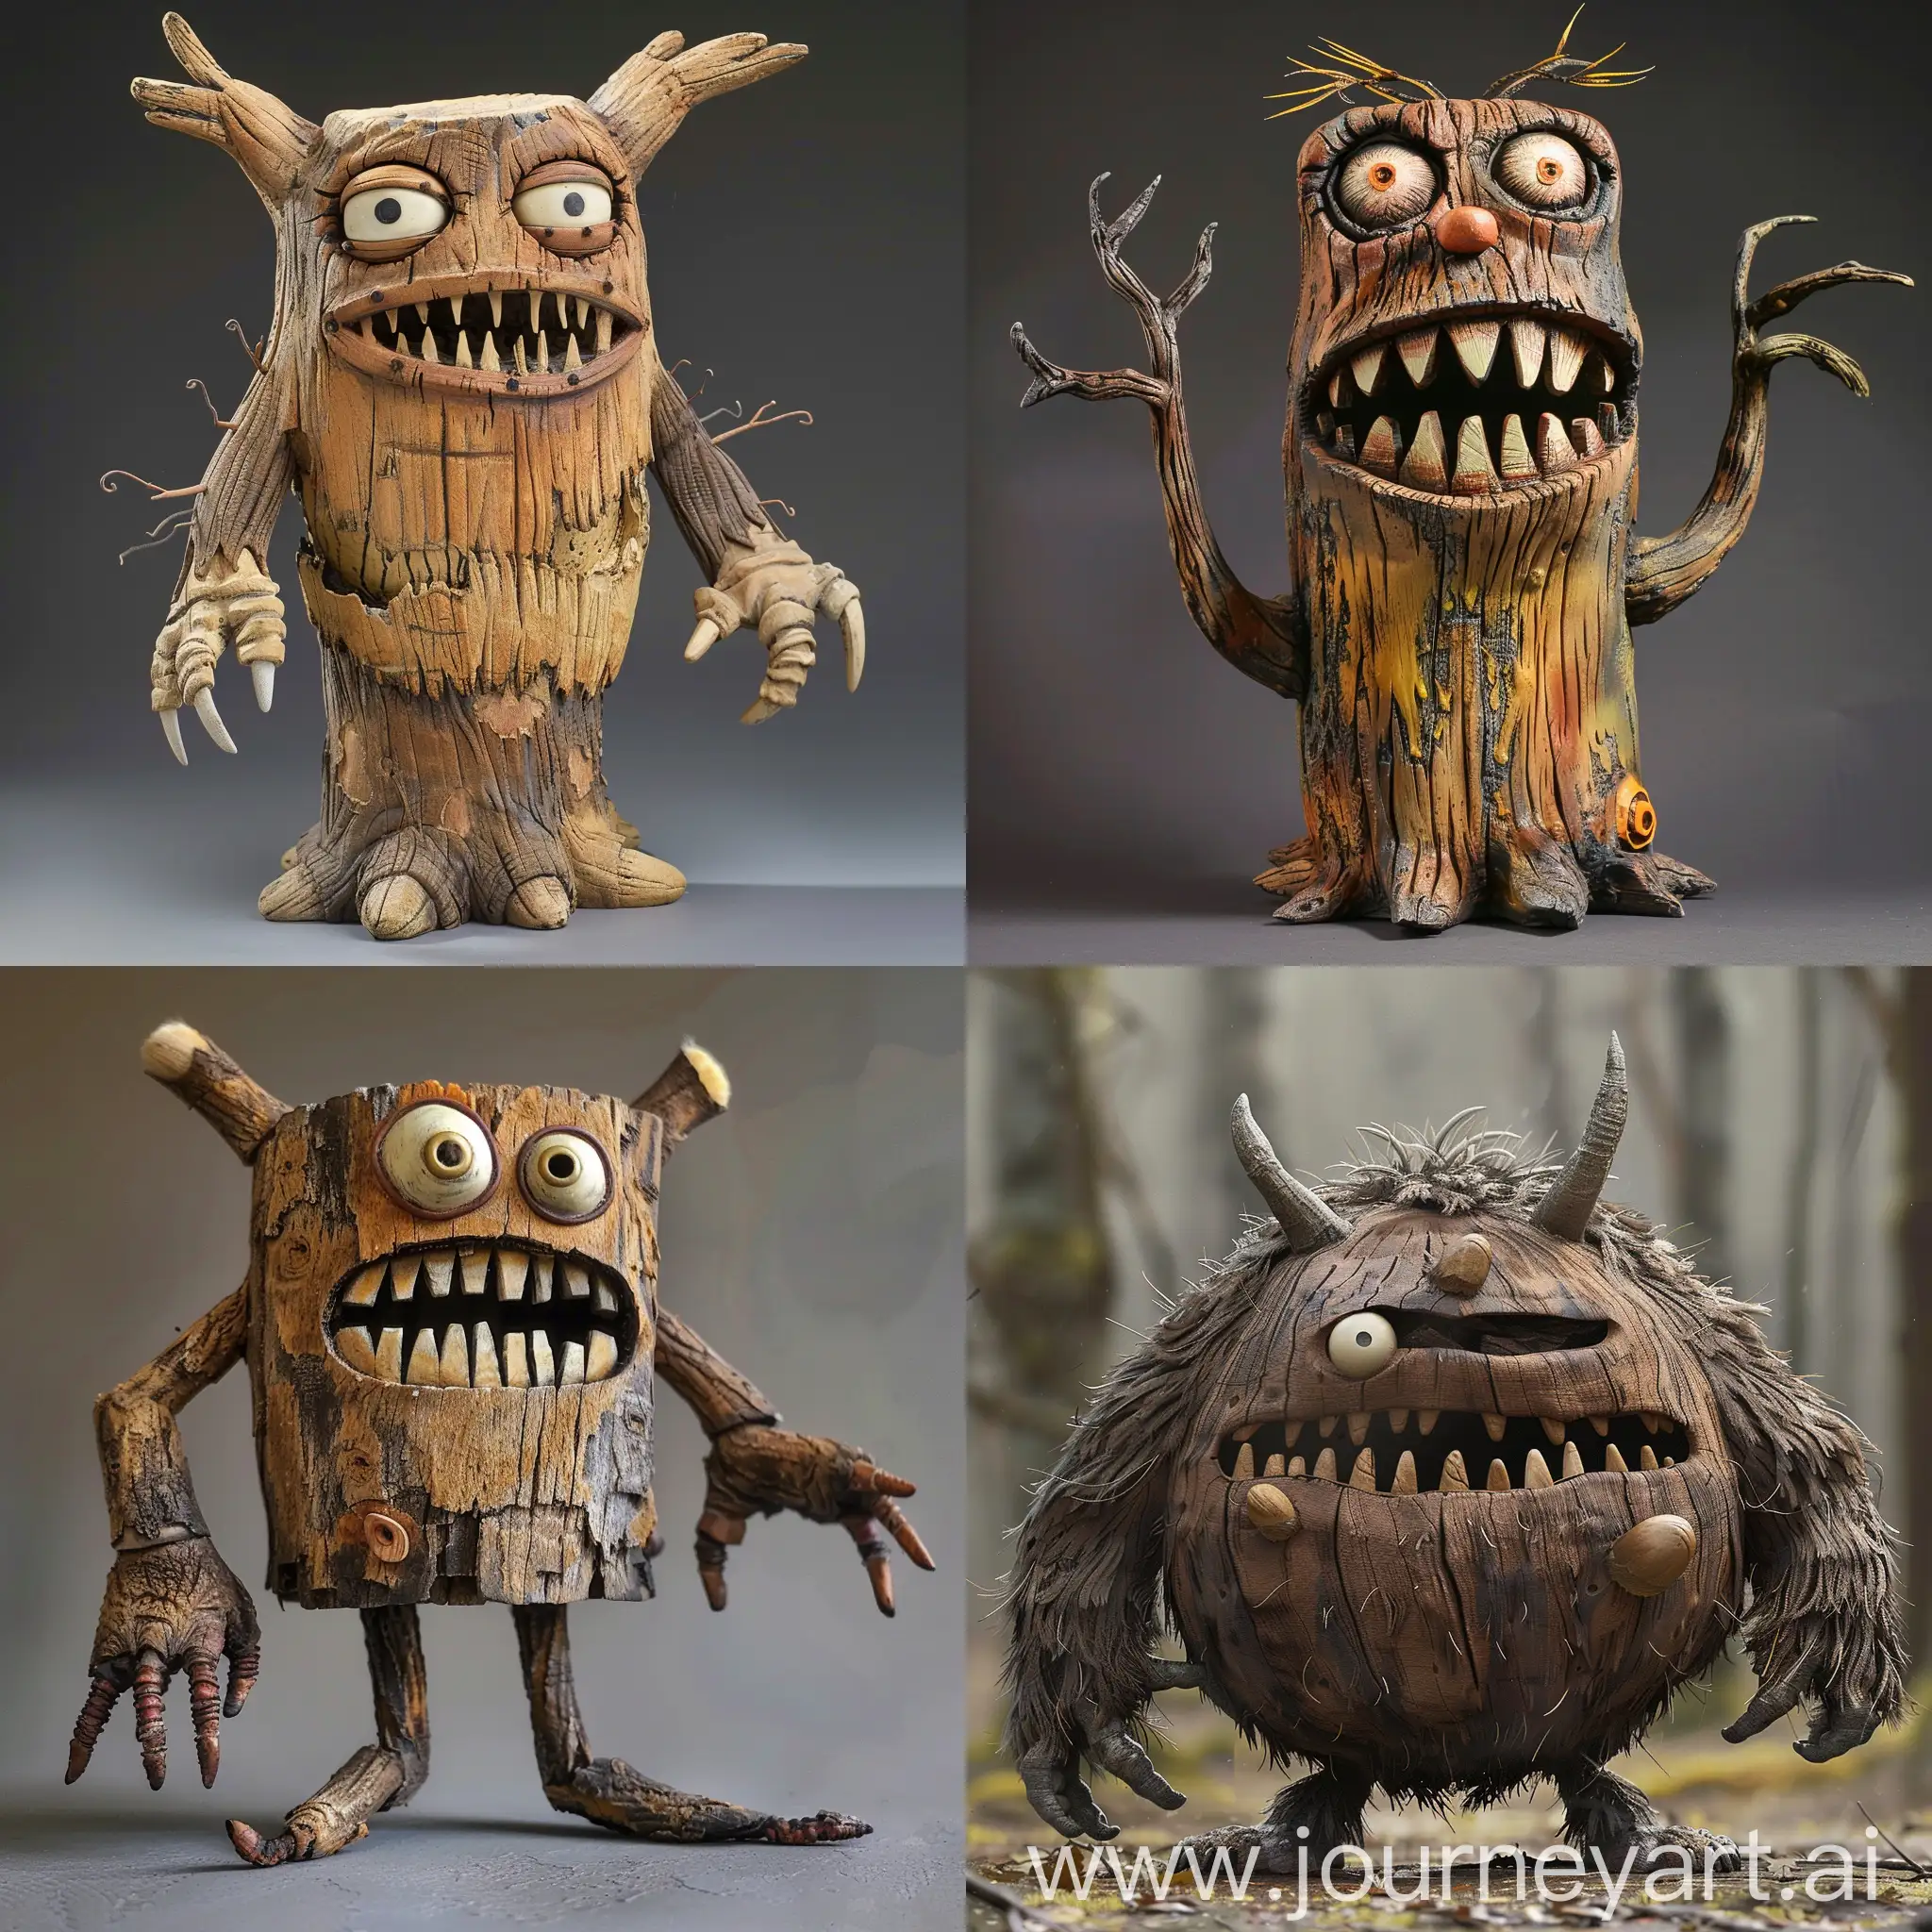 Playful-Woody-Monster-with-Vibrant-Colors